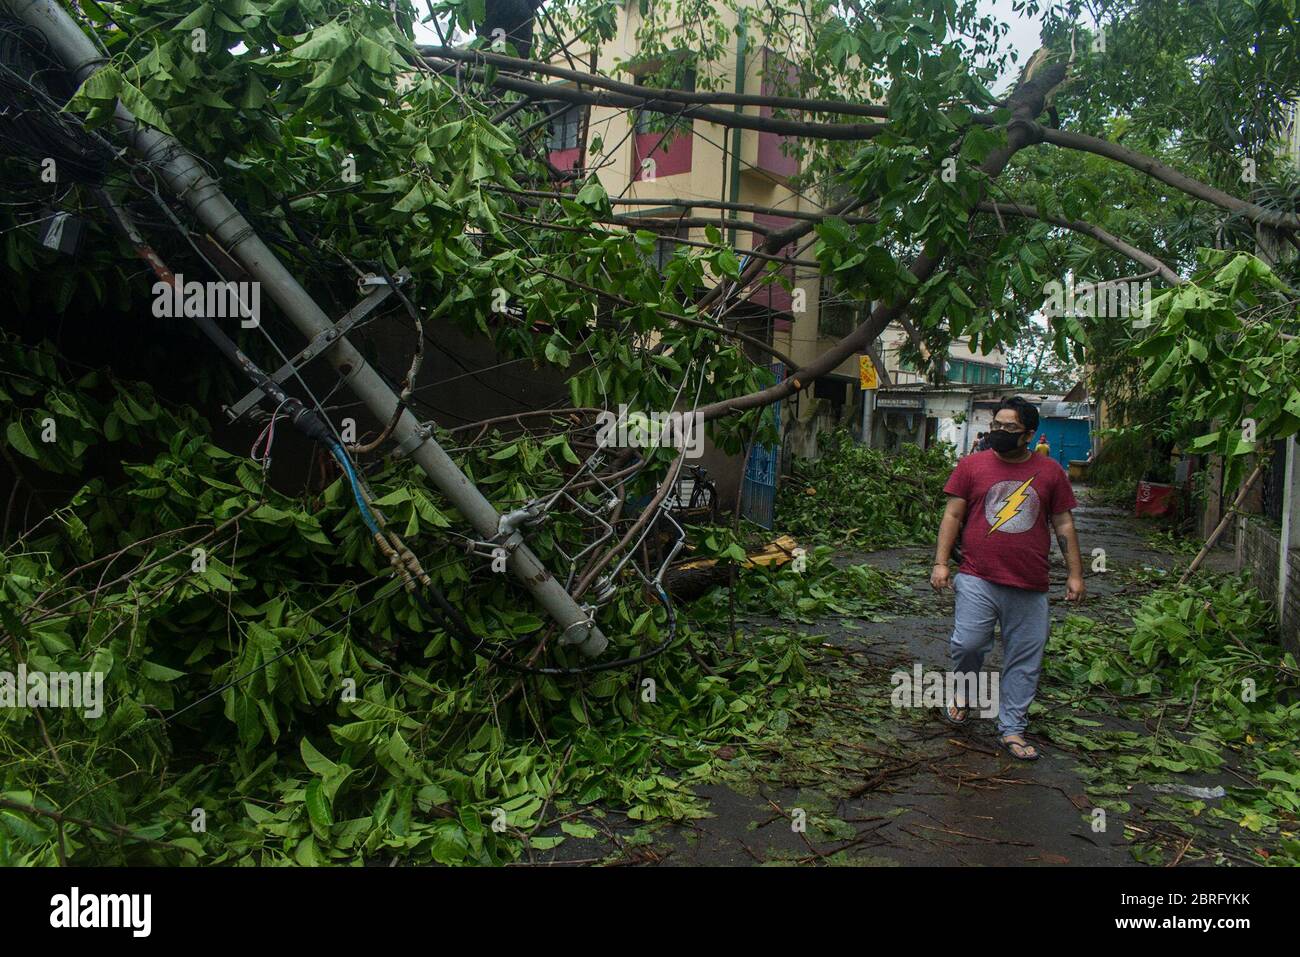 Kolkata, India. 21st May, 2020. Everywhere in the city, today one can see the massive destruction caused by super cyclone Amphan, last evening this massive cyclone destroyed the city. Tress uprooted, signal posts are broken, many rooftops of houses are flown in the winds and huge area of city were suffering from electricity. Still now 10-12 casualties reported and amount of total losses of property are presently being estimated by the State Government. (Photo by Anirban Lahiri/Pacific Press) Credit: Pacific Press Agency/Alamy Live News Stock Photo